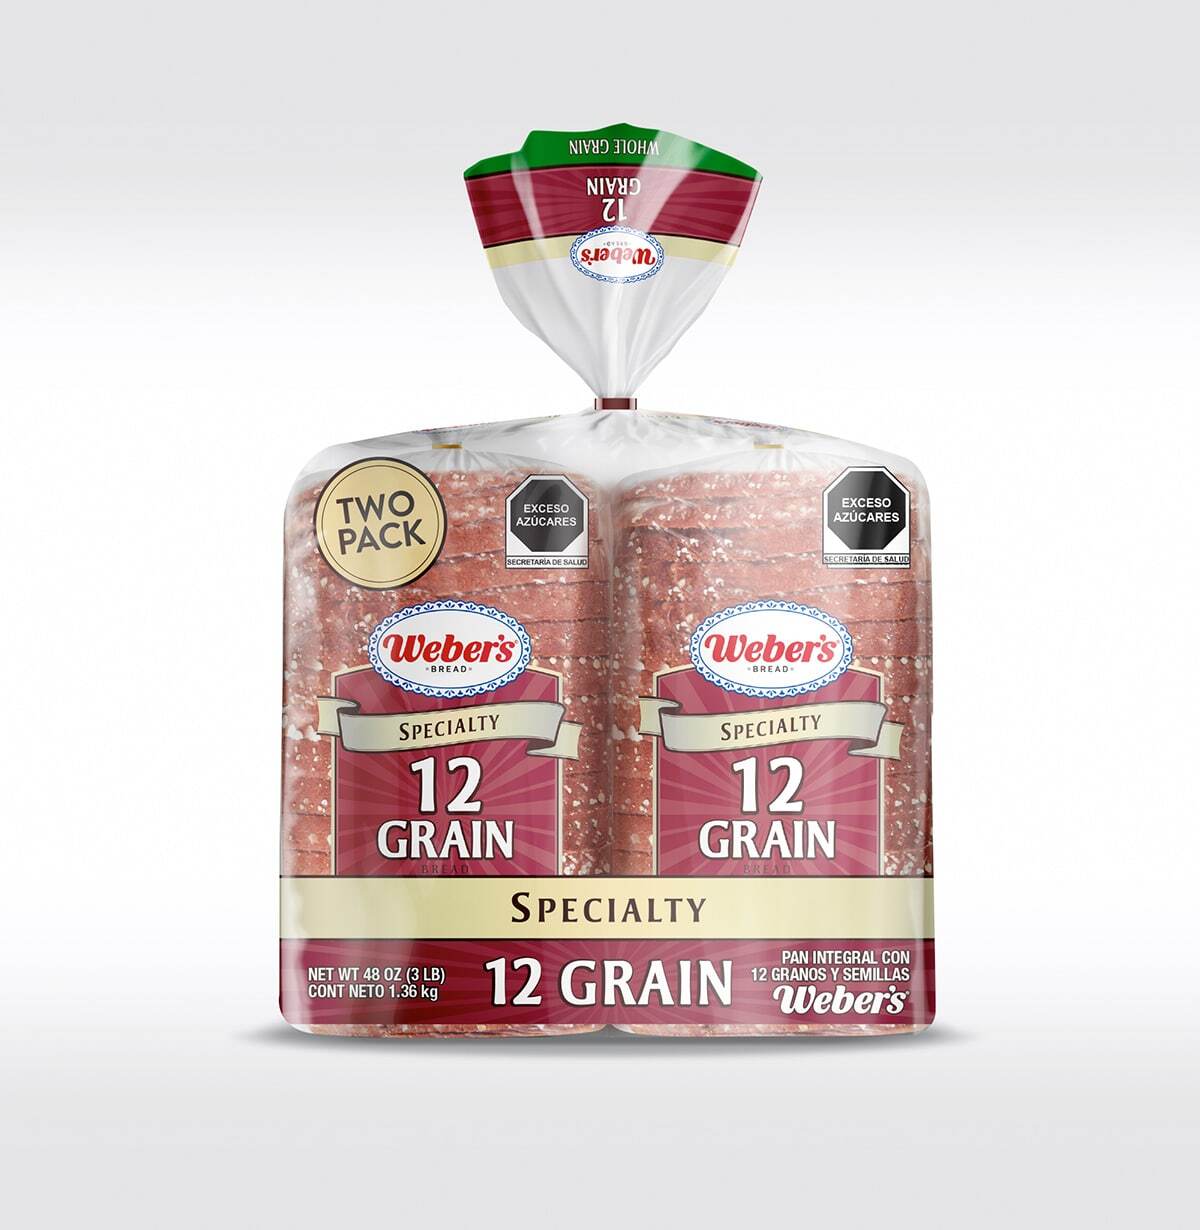 Imaginity, Weber's, Specialty, 2 Grain, Packaging Design, Bread, Two Pack